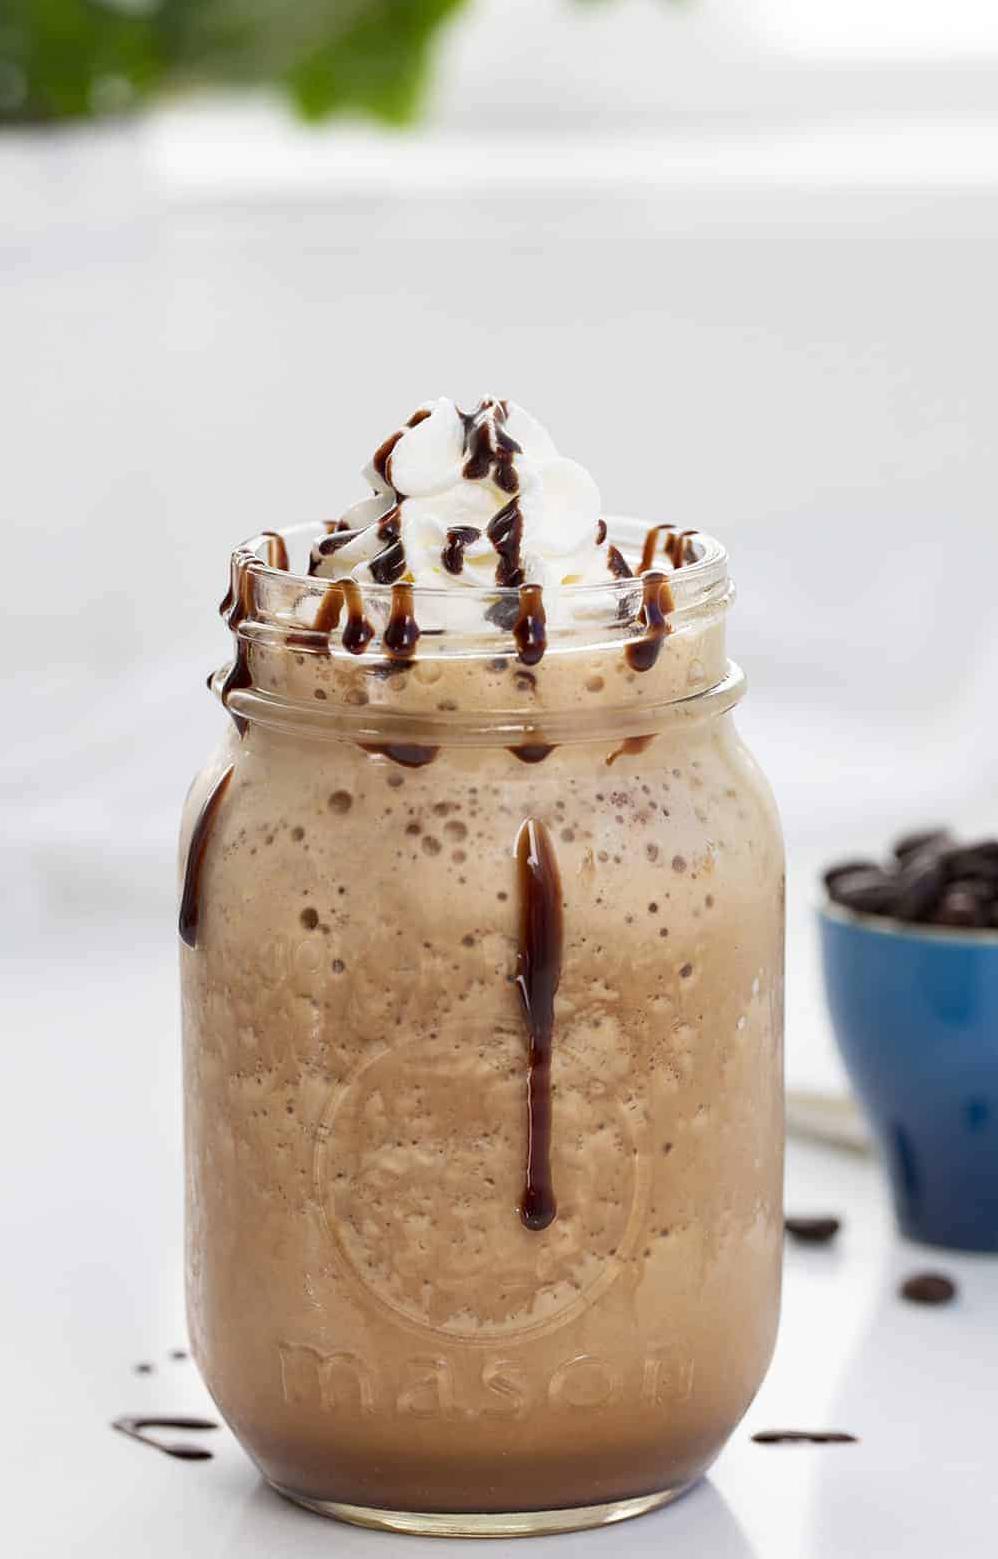  This refreshing blend of coffee, chocolate, and ice is perfect for a hot summer day.